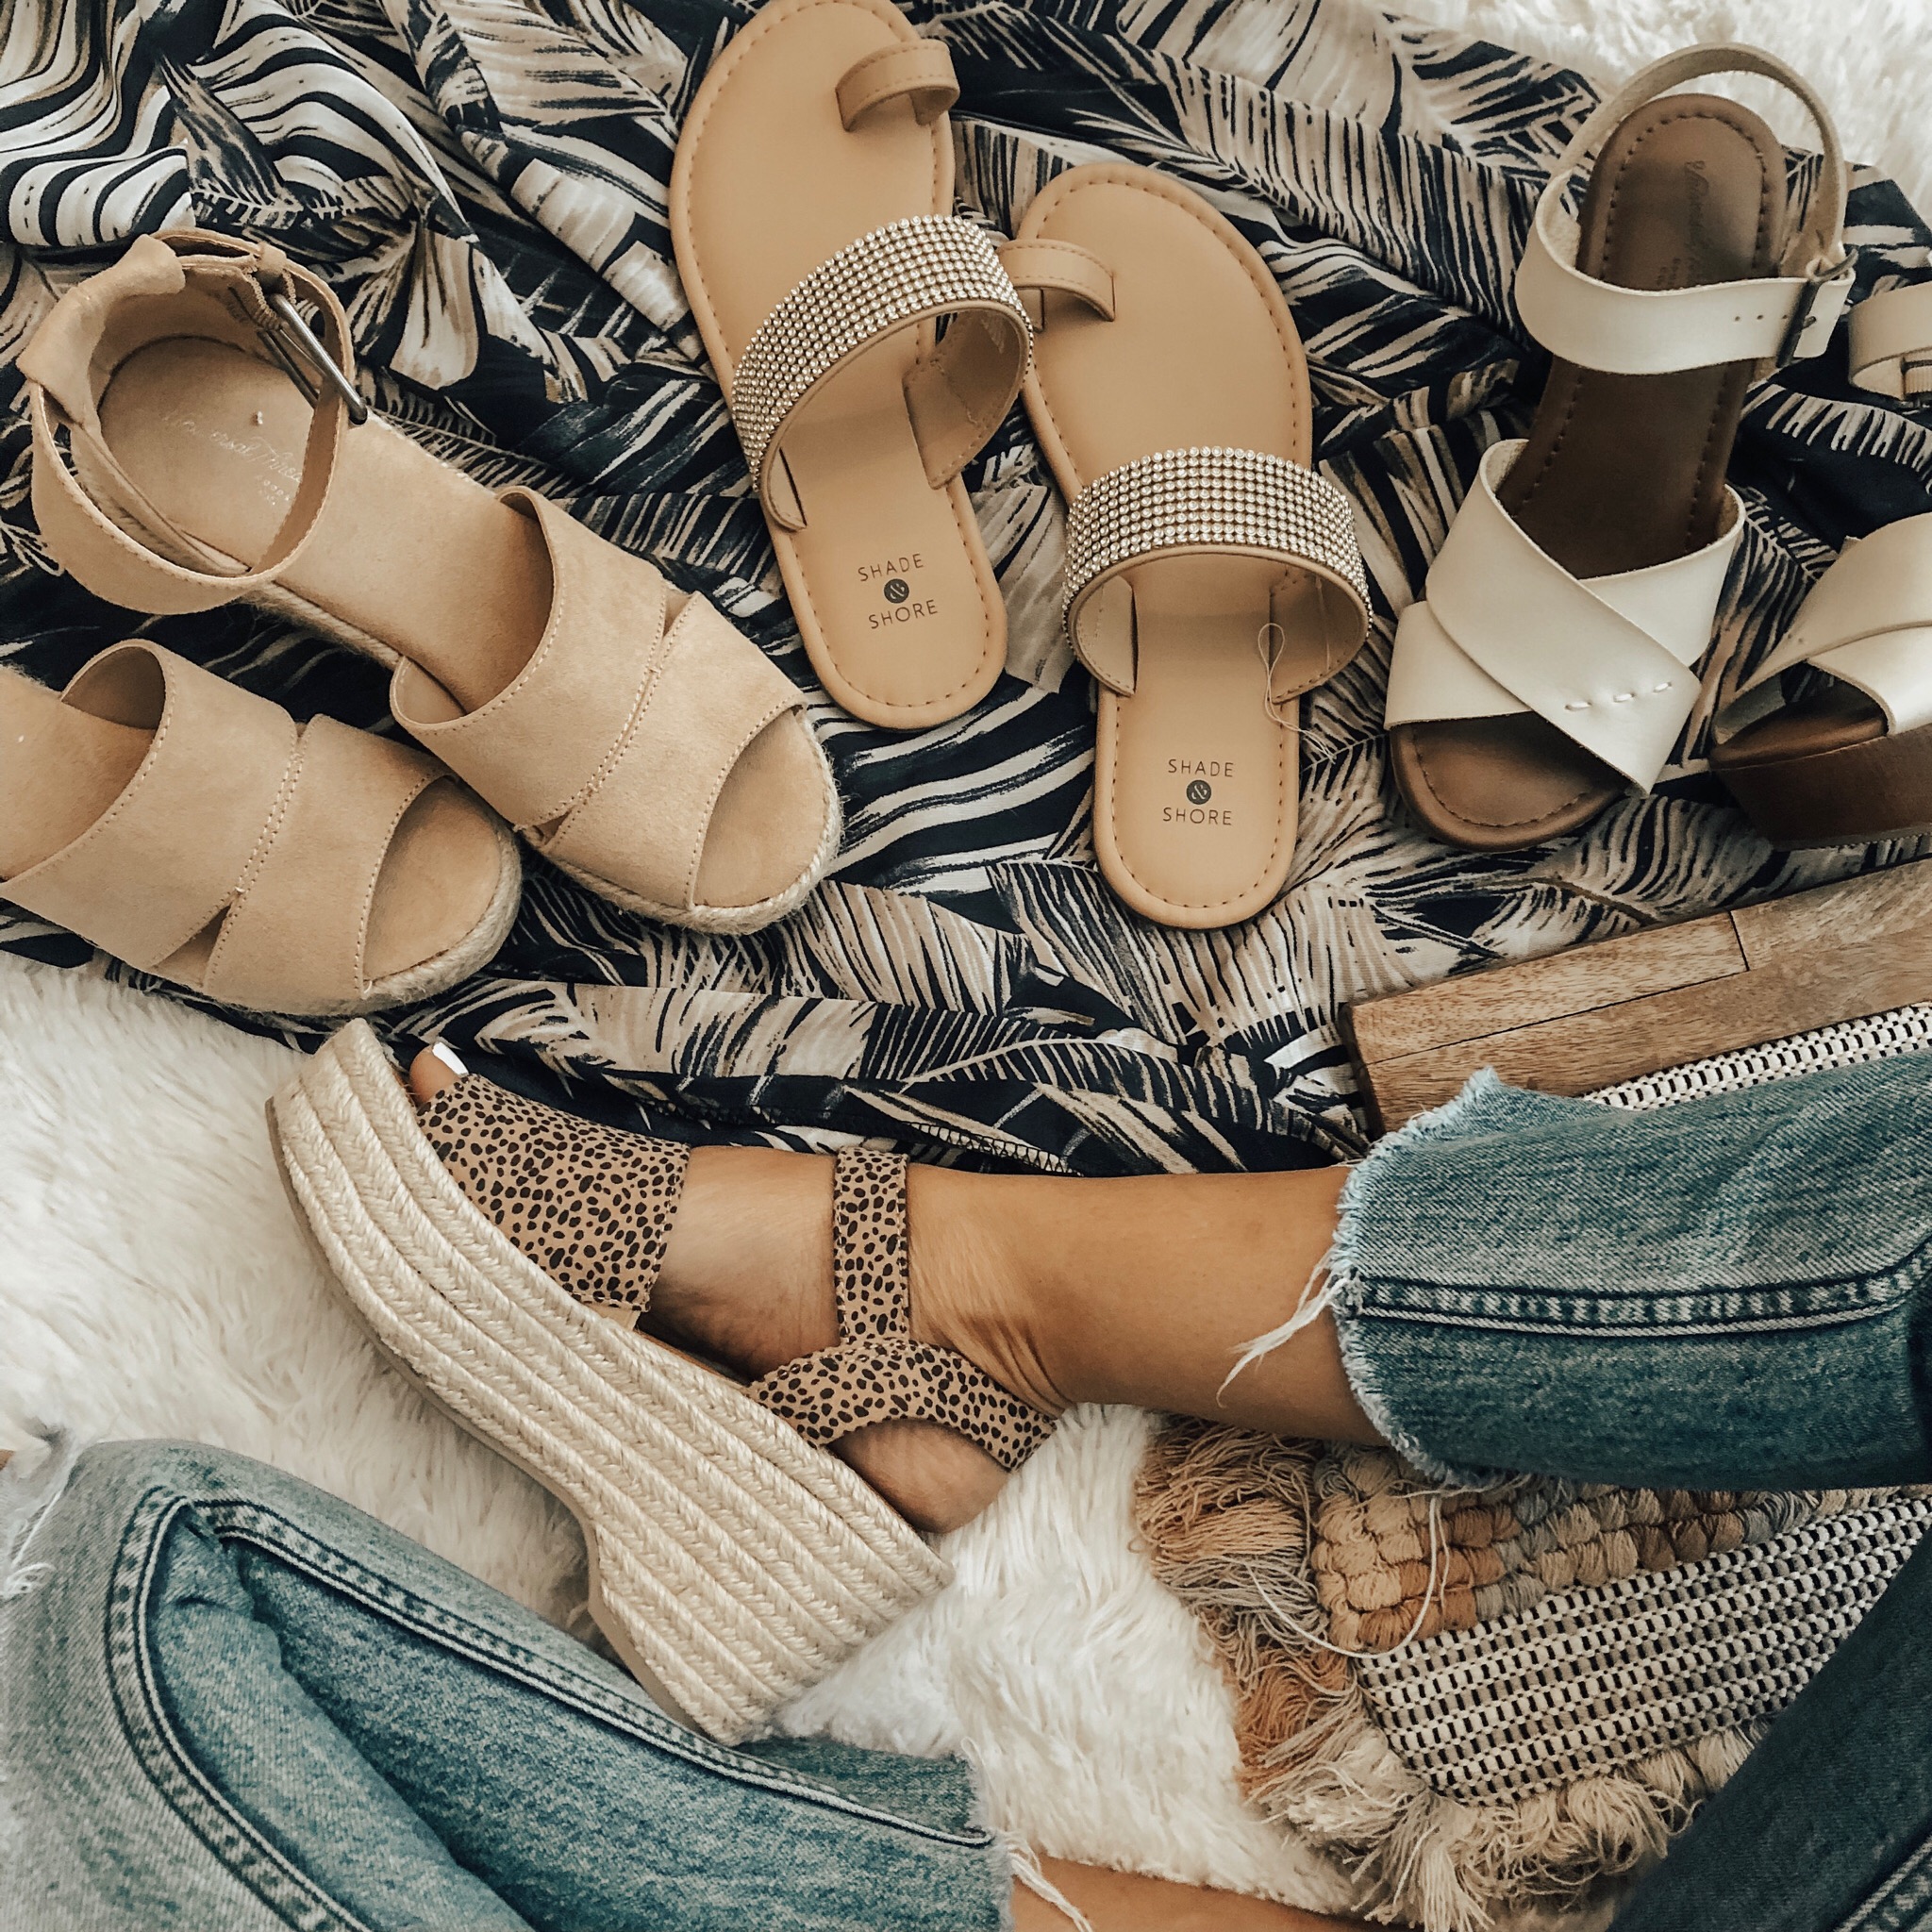 CURRENT SHOE TRENDS- WHAT I'M LOVING AND WHAT YOU NEED- Jaclyn De Leon Style + Are you ready for Spring and Summer? I'm sharing all the current shoe trends for Spring and Summer including espadrilles, mules, sandals and much more. And all are affordable with most on major sale!